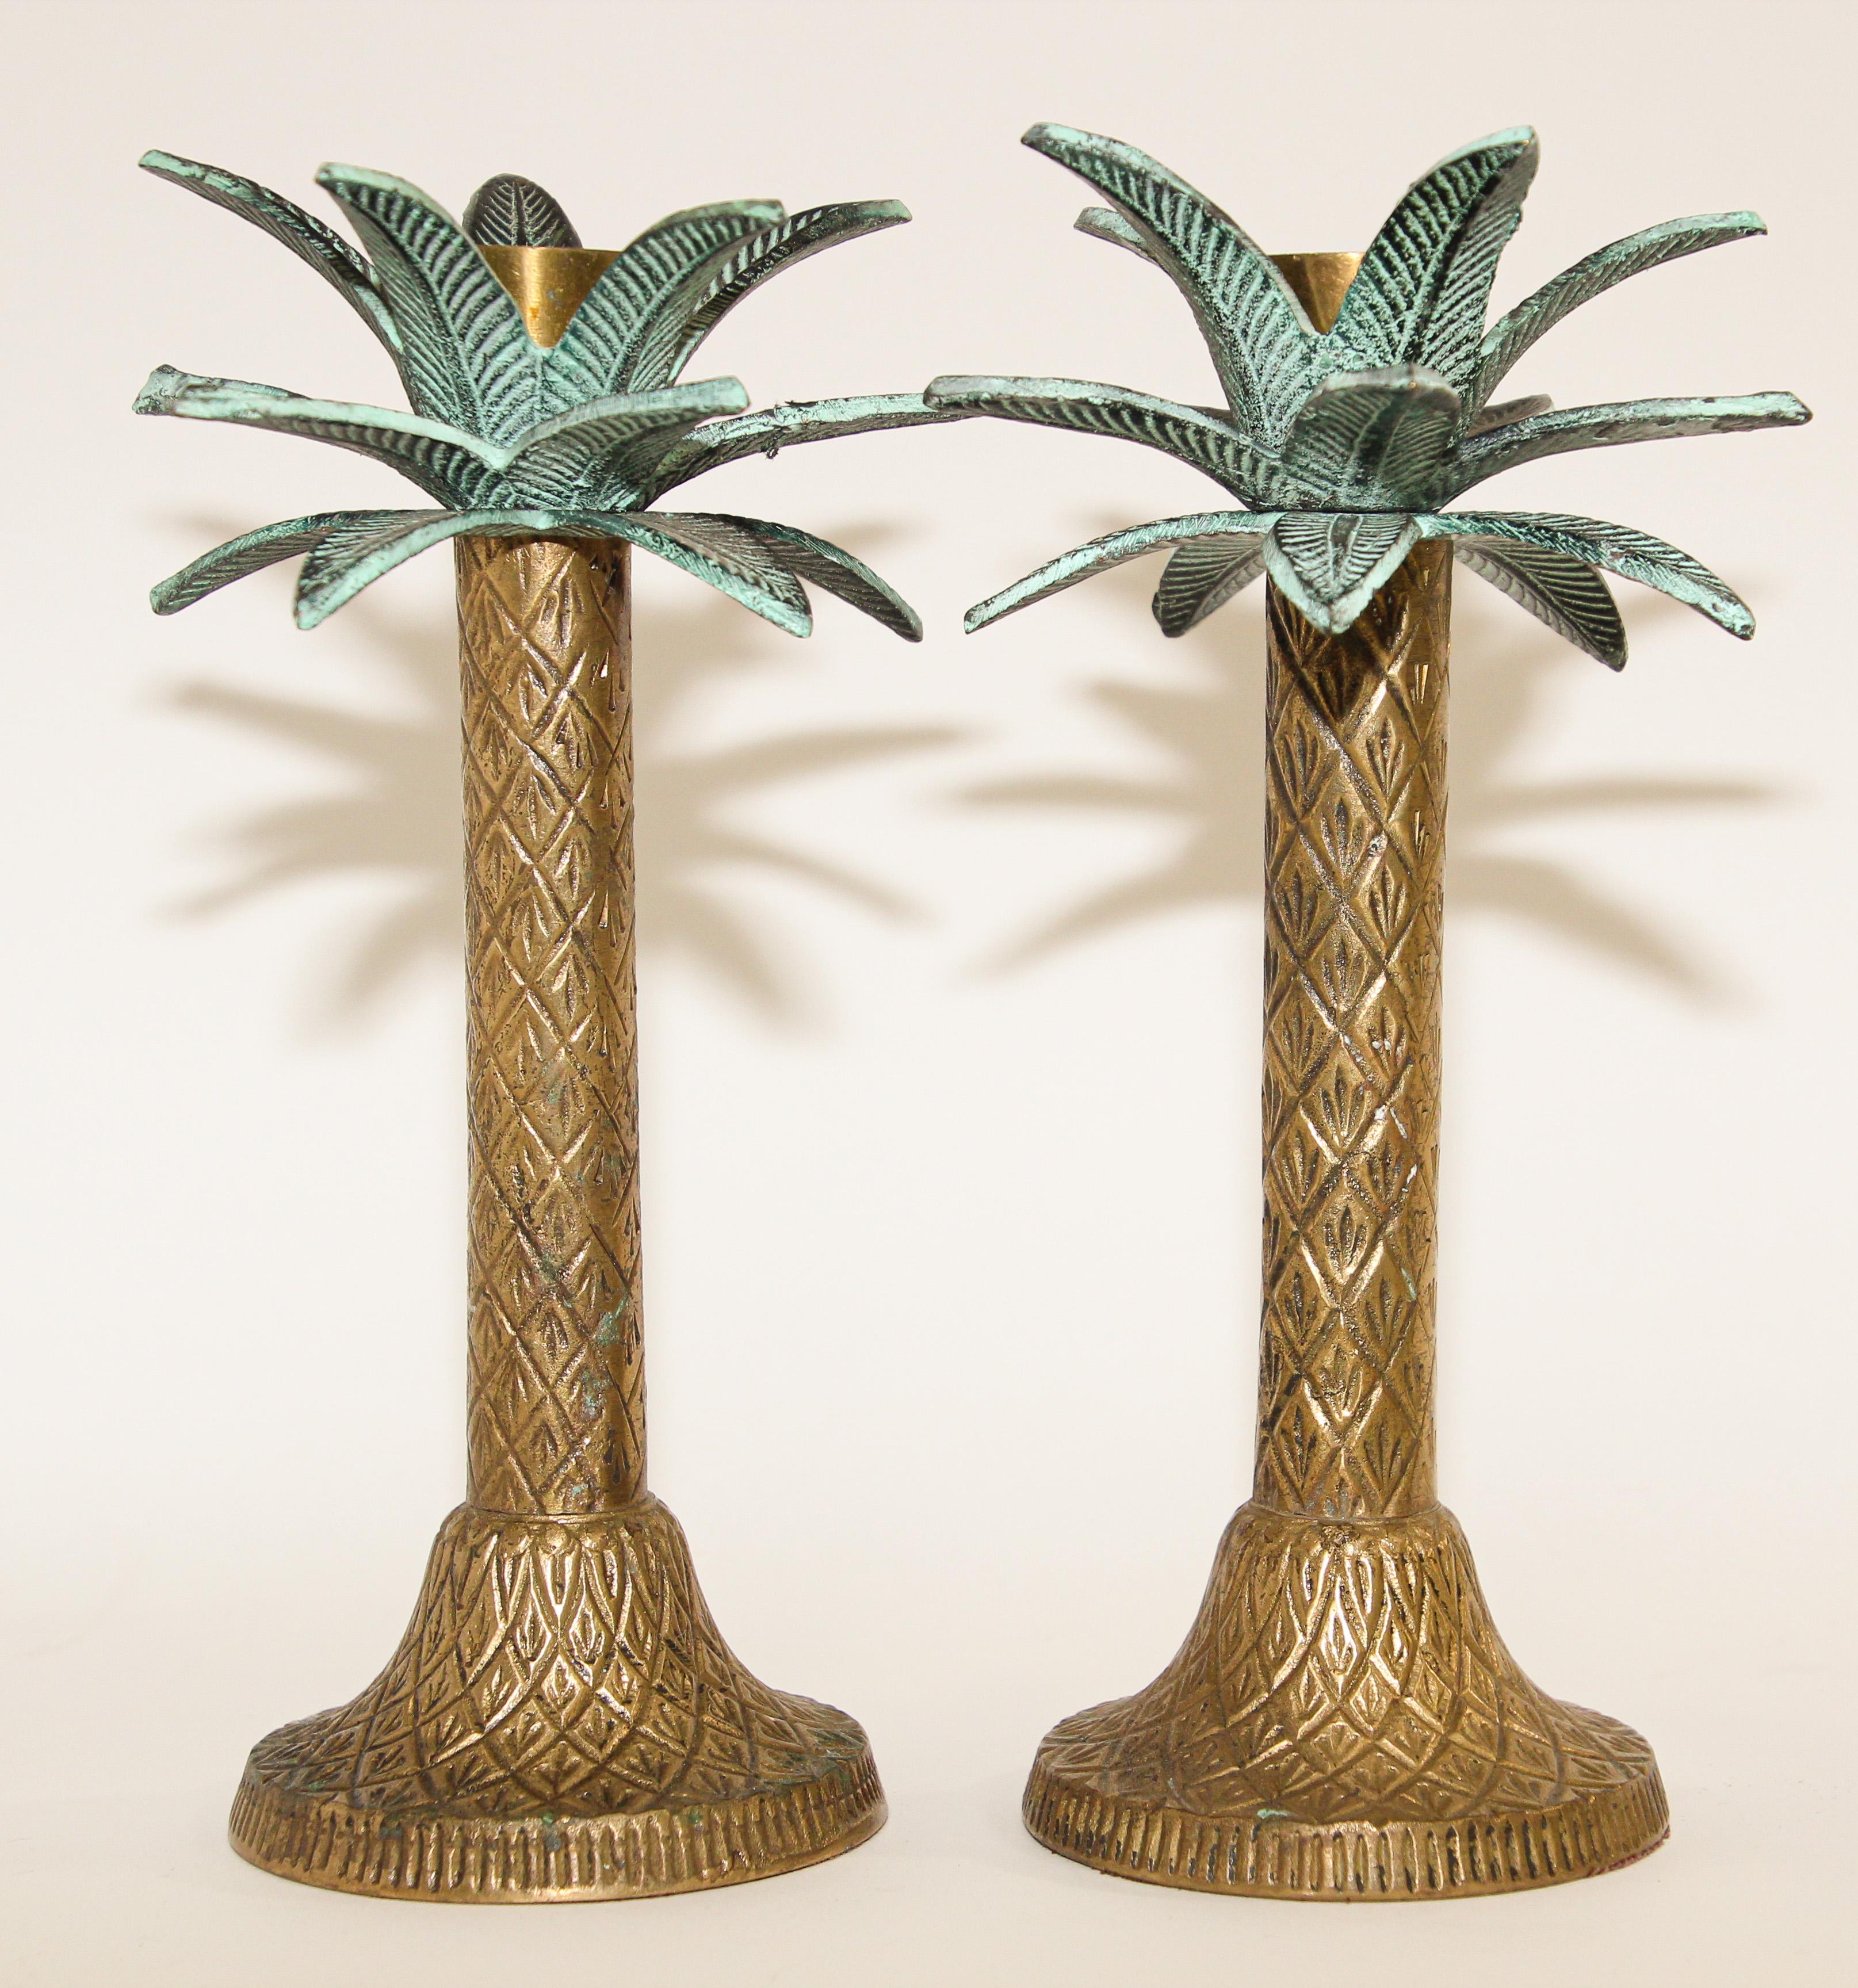 Asian Vintage Brass Palm Tree Candlestick Holders a Pair